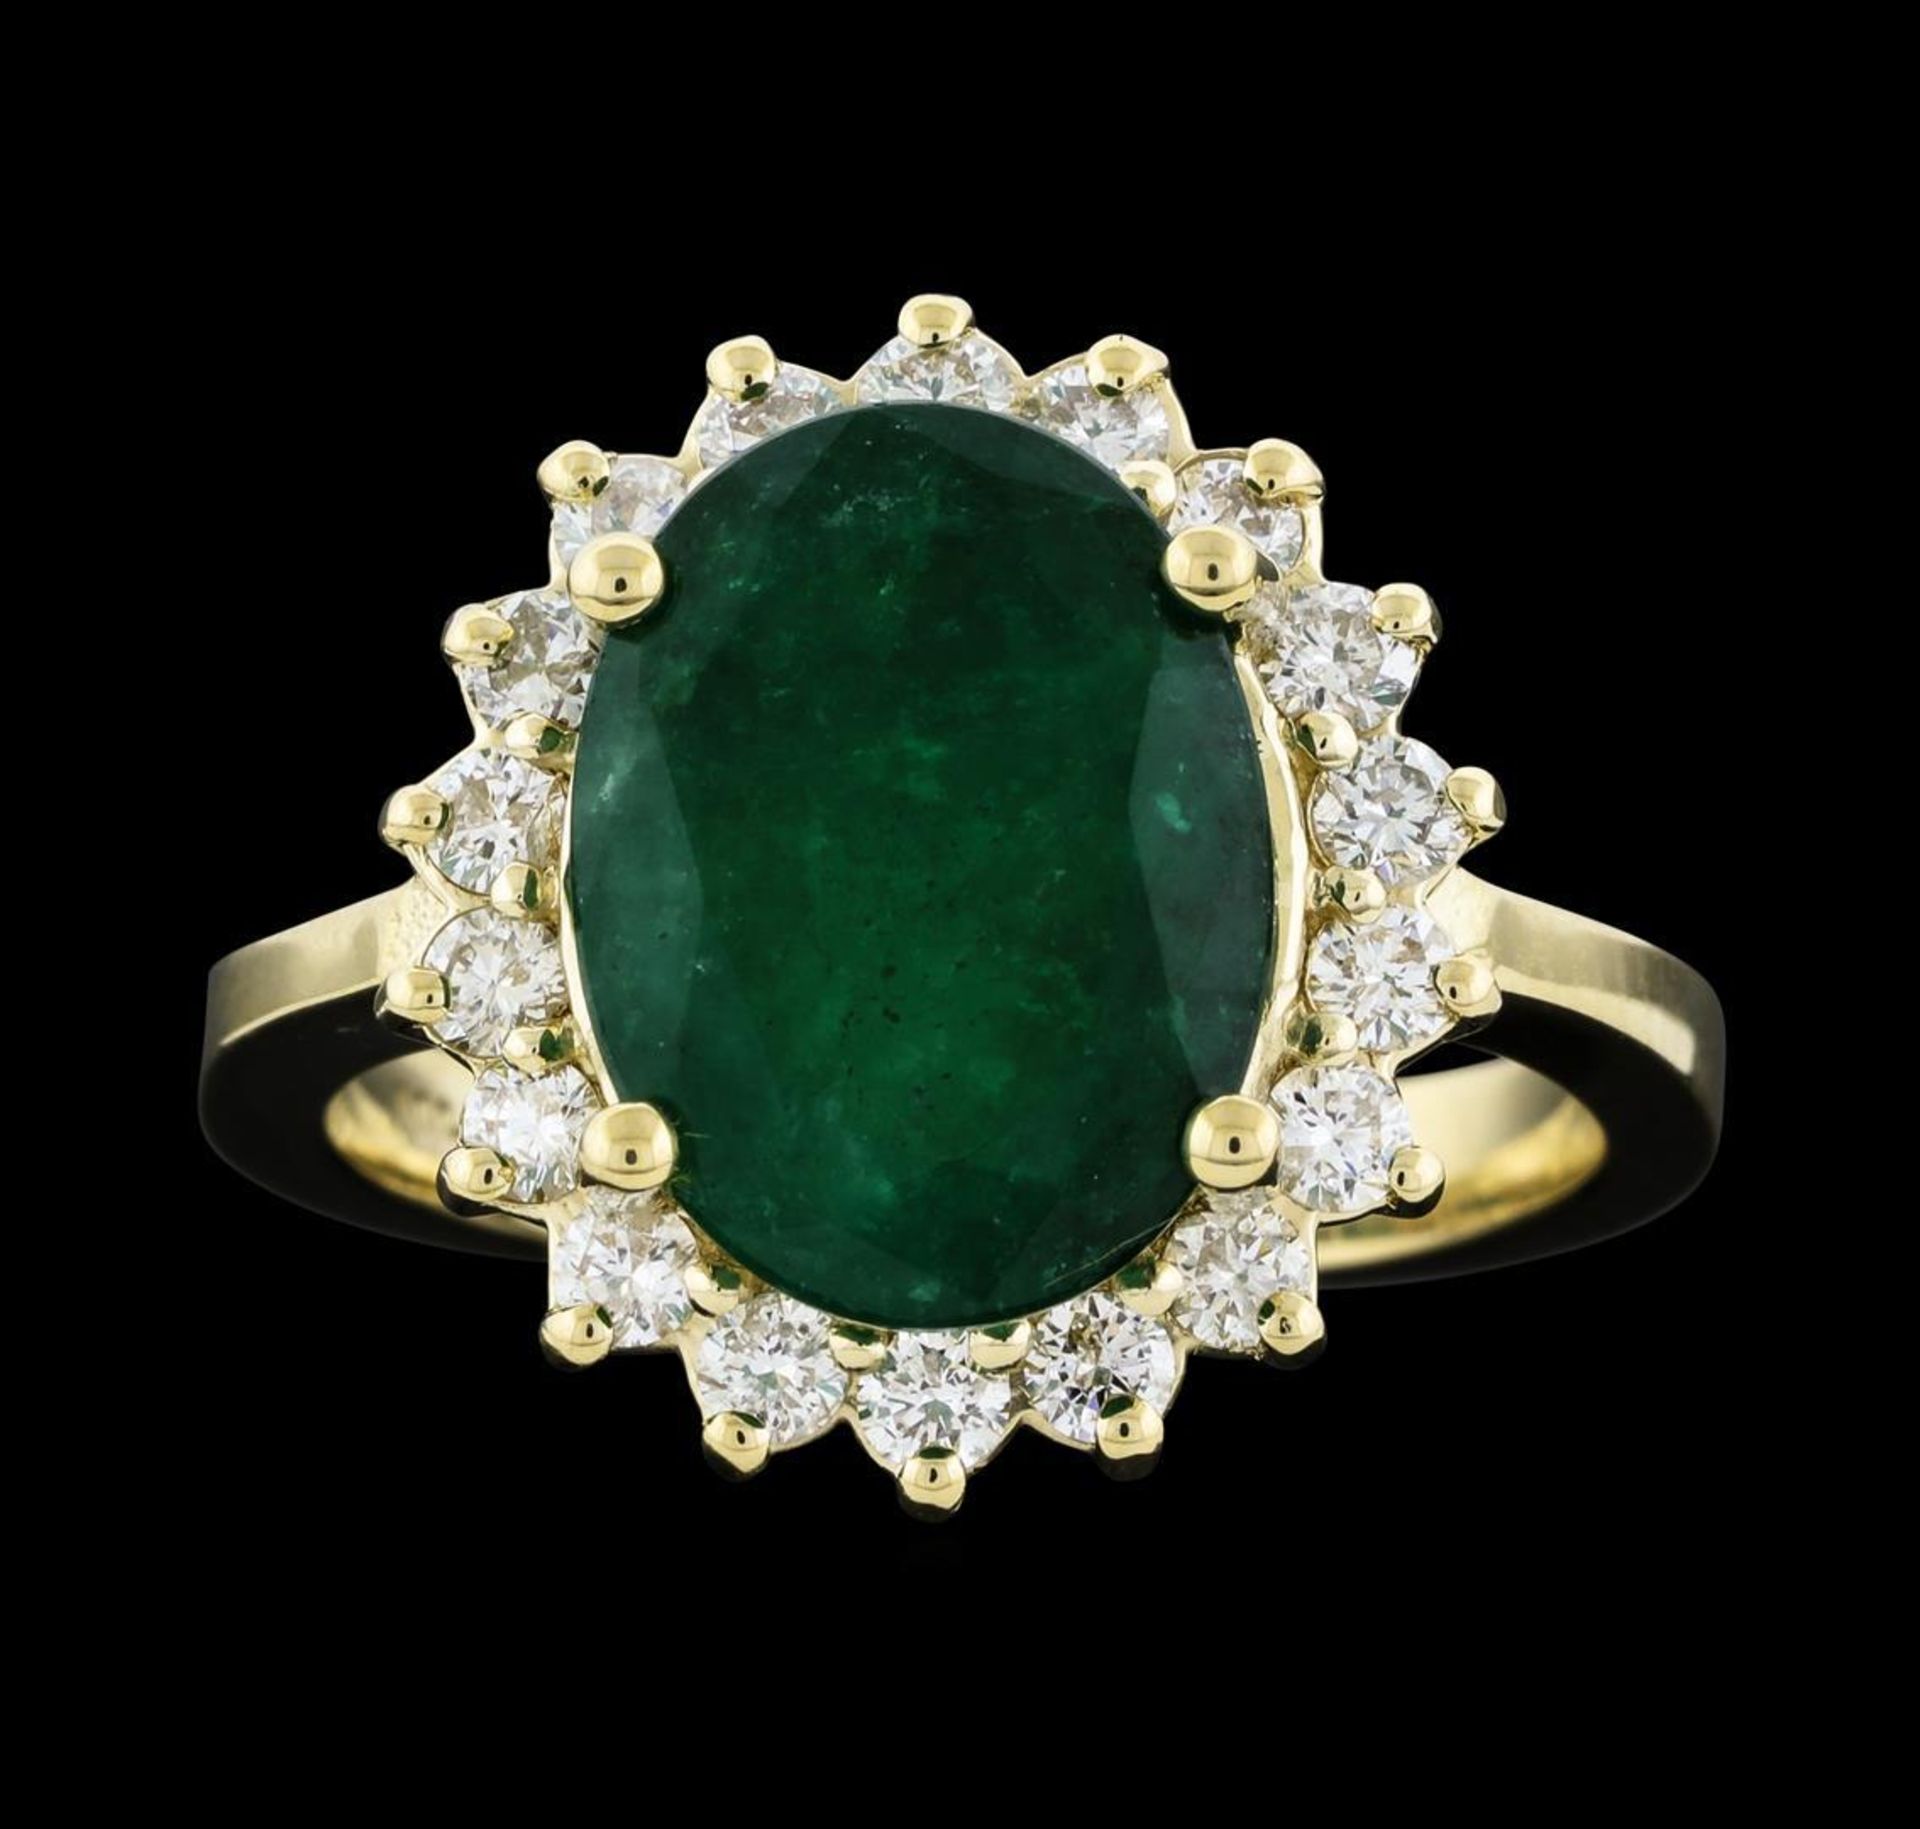 4.41 ctw Emerald and Diamond Ring - 14KT Yellow Gold - Image 2 of 5